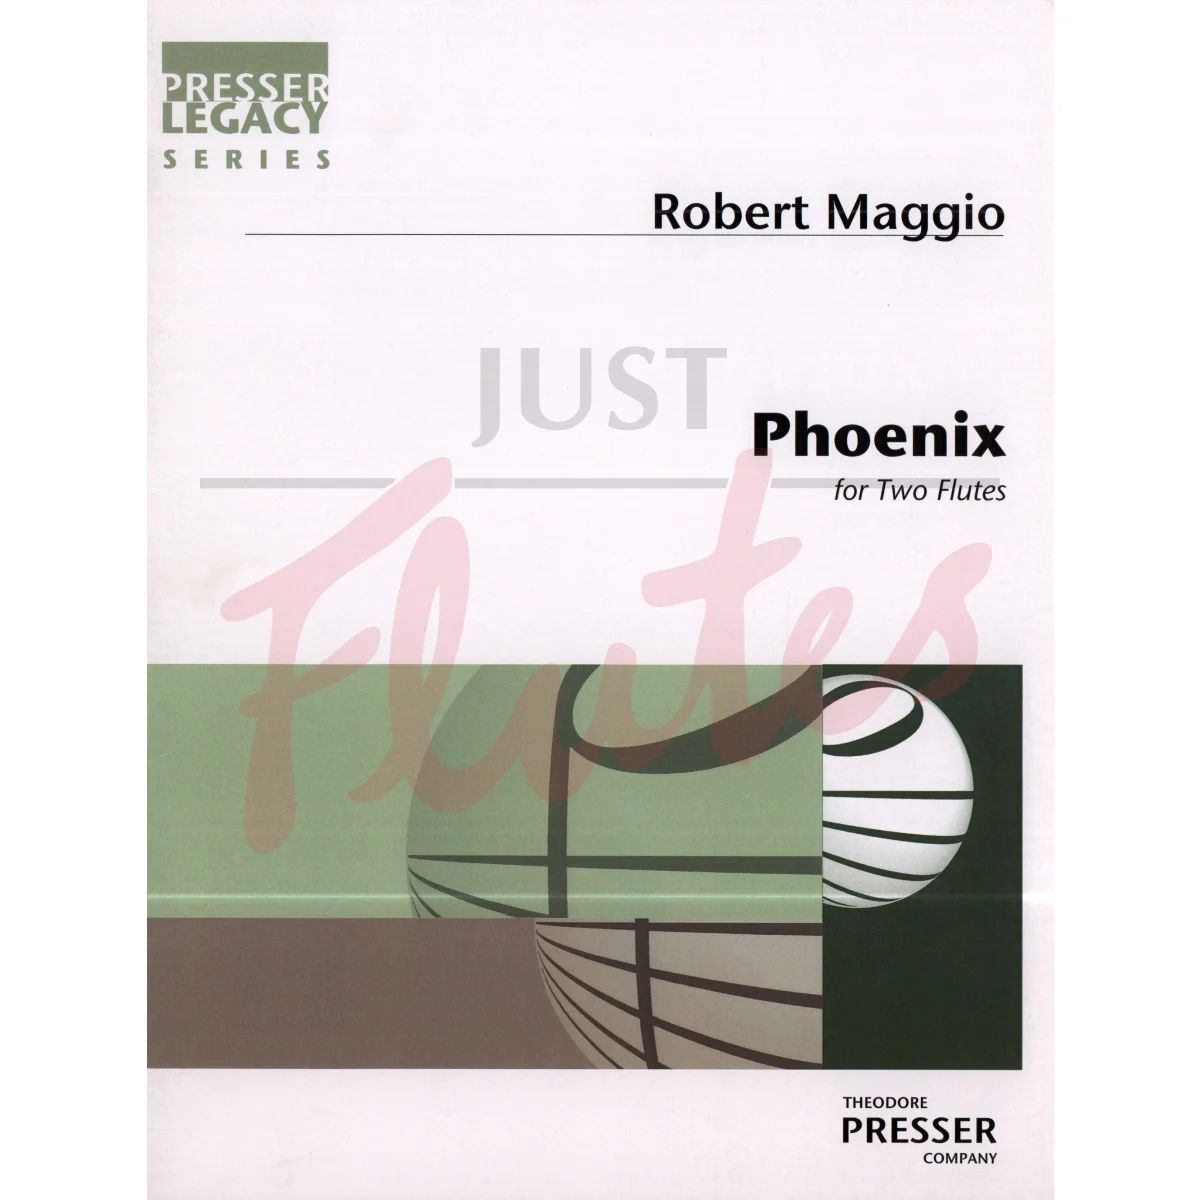 Phoenix for Two Flutes